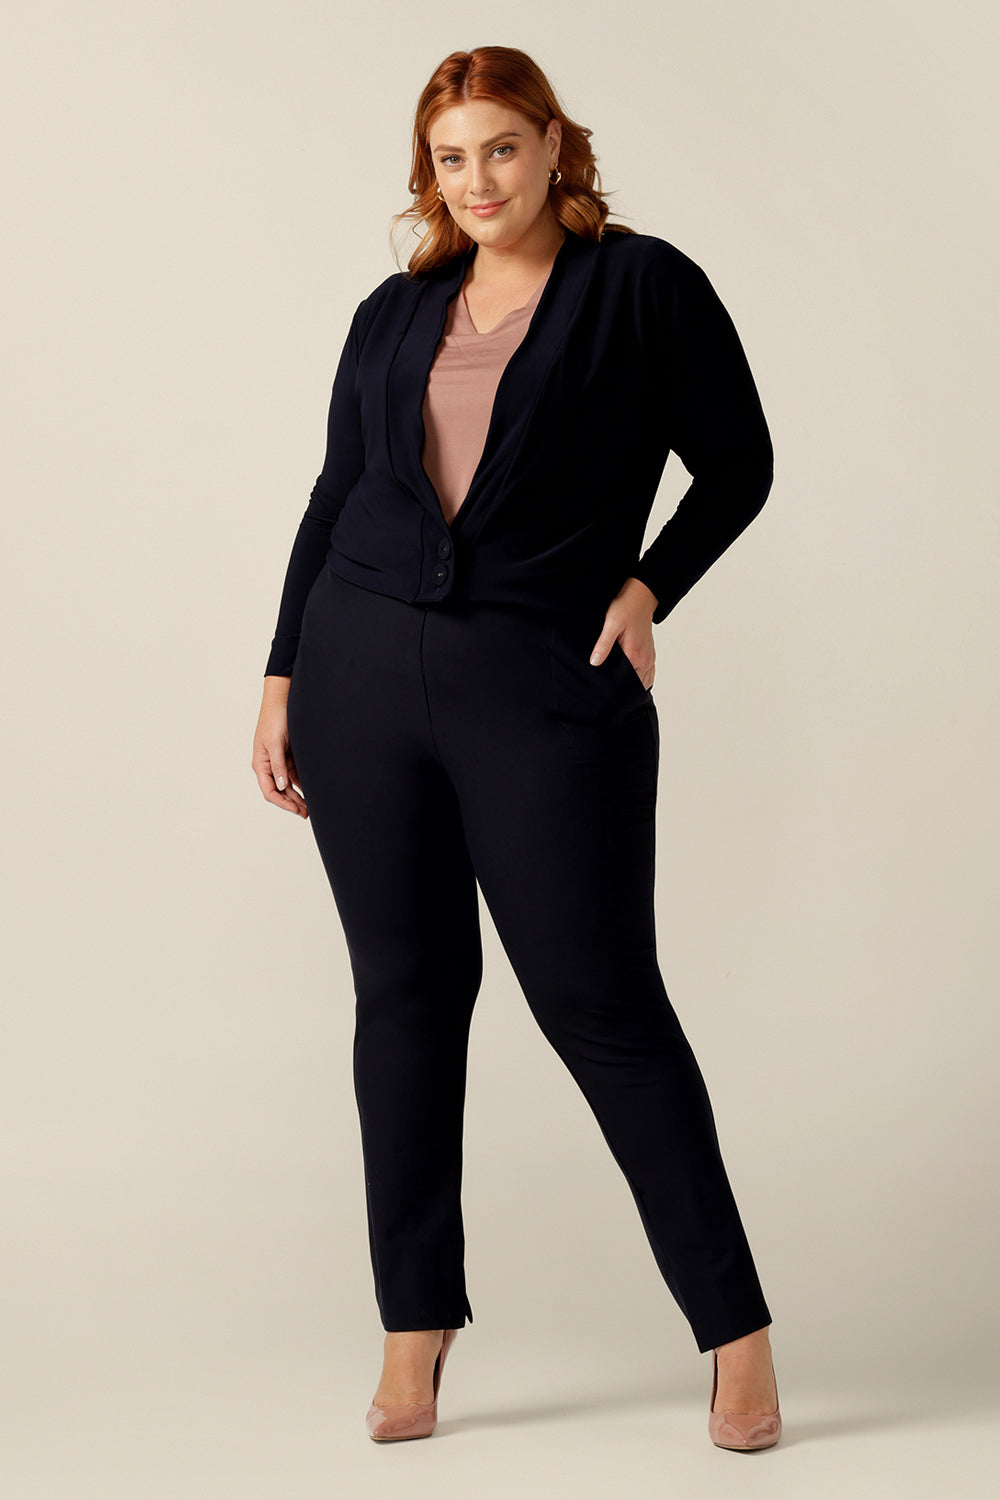 A plus size woman wears a soft navy jacket in a size 18. The best jacket for autumn/winter, this long sleeves 2-button cover-up is a as comfortable as a cardigan but with a corporate edge that transitions for work wear. 